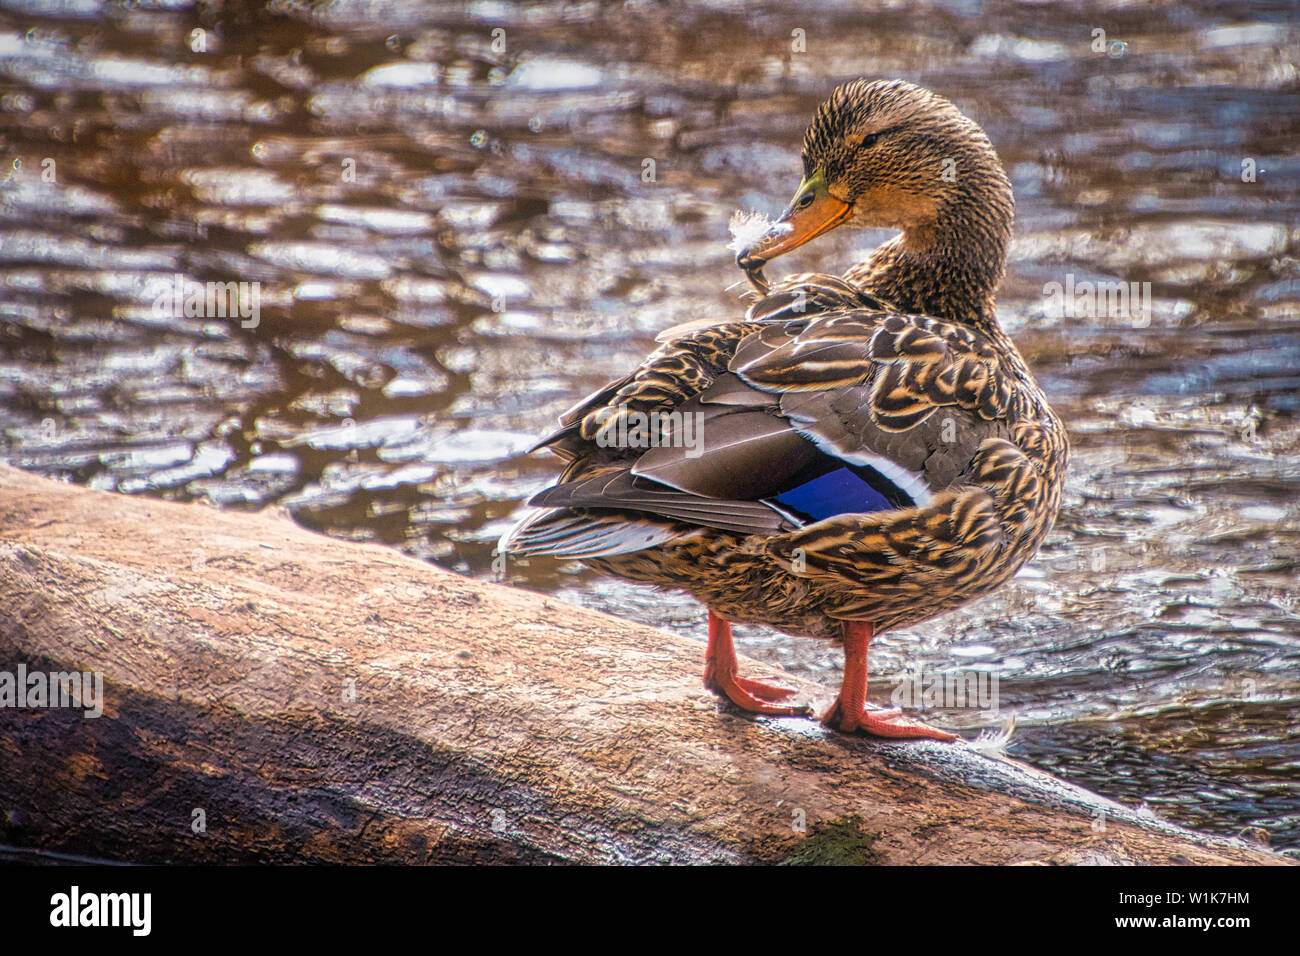 This Mallard hen was spotted preening on the banks or Bronte Creek in Oakville, Ontario Canada. Stock Photo